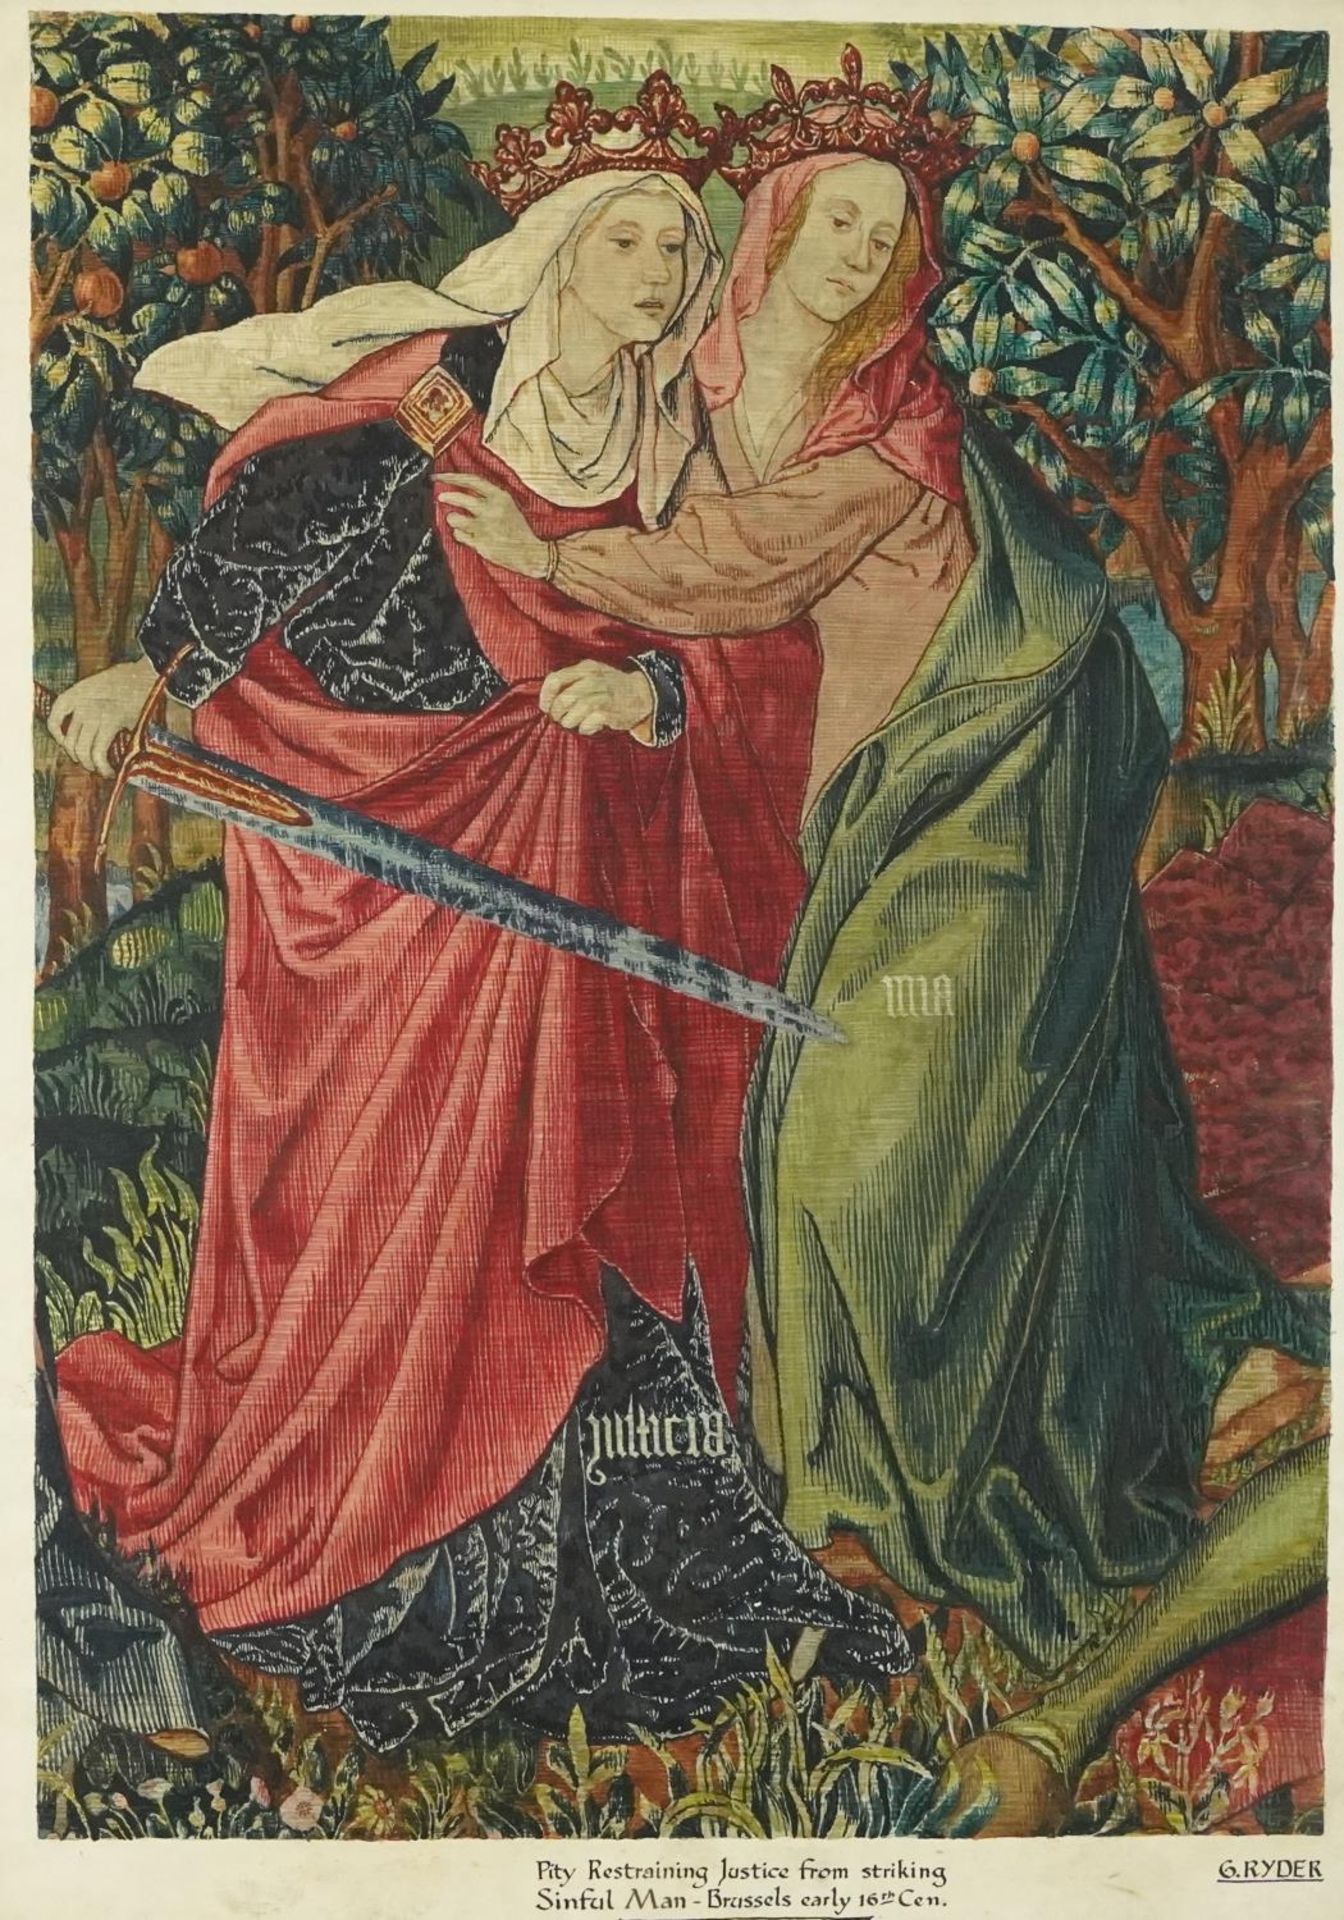 G Ryder - Pity Restraining Justice Striking Sinful Man Brussels early 16th century, Pre-Raphaelite